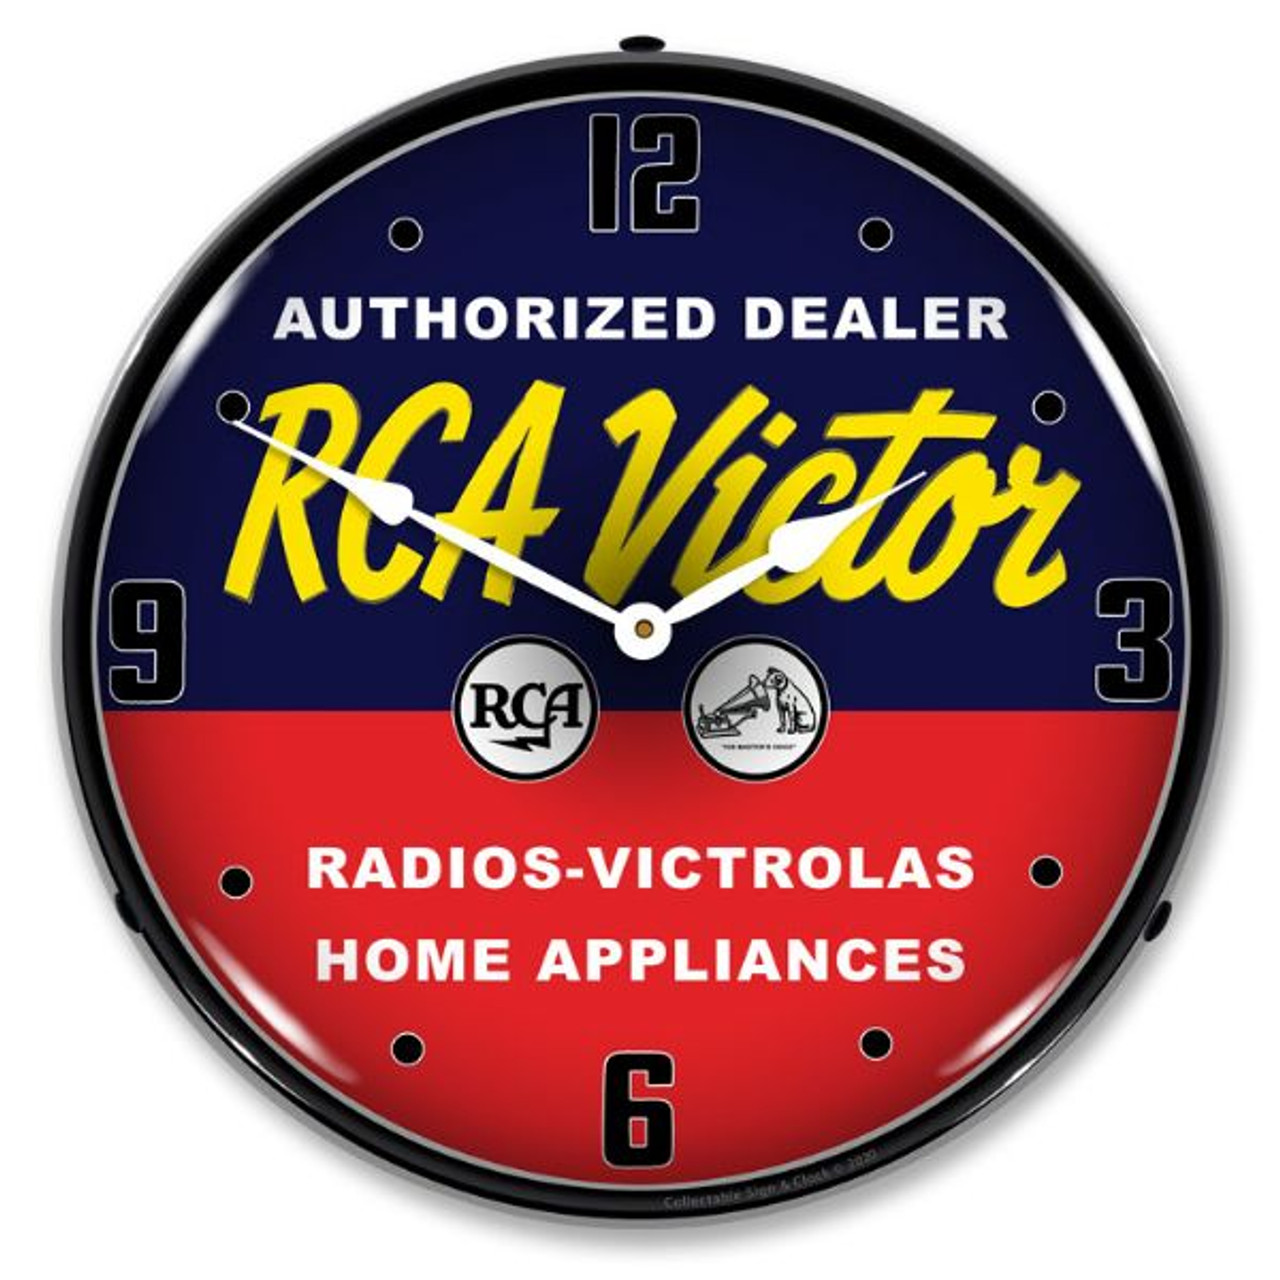 RCA Victor Authorized Dealer LED Lighted Wall Clock 14 x 14 Inches